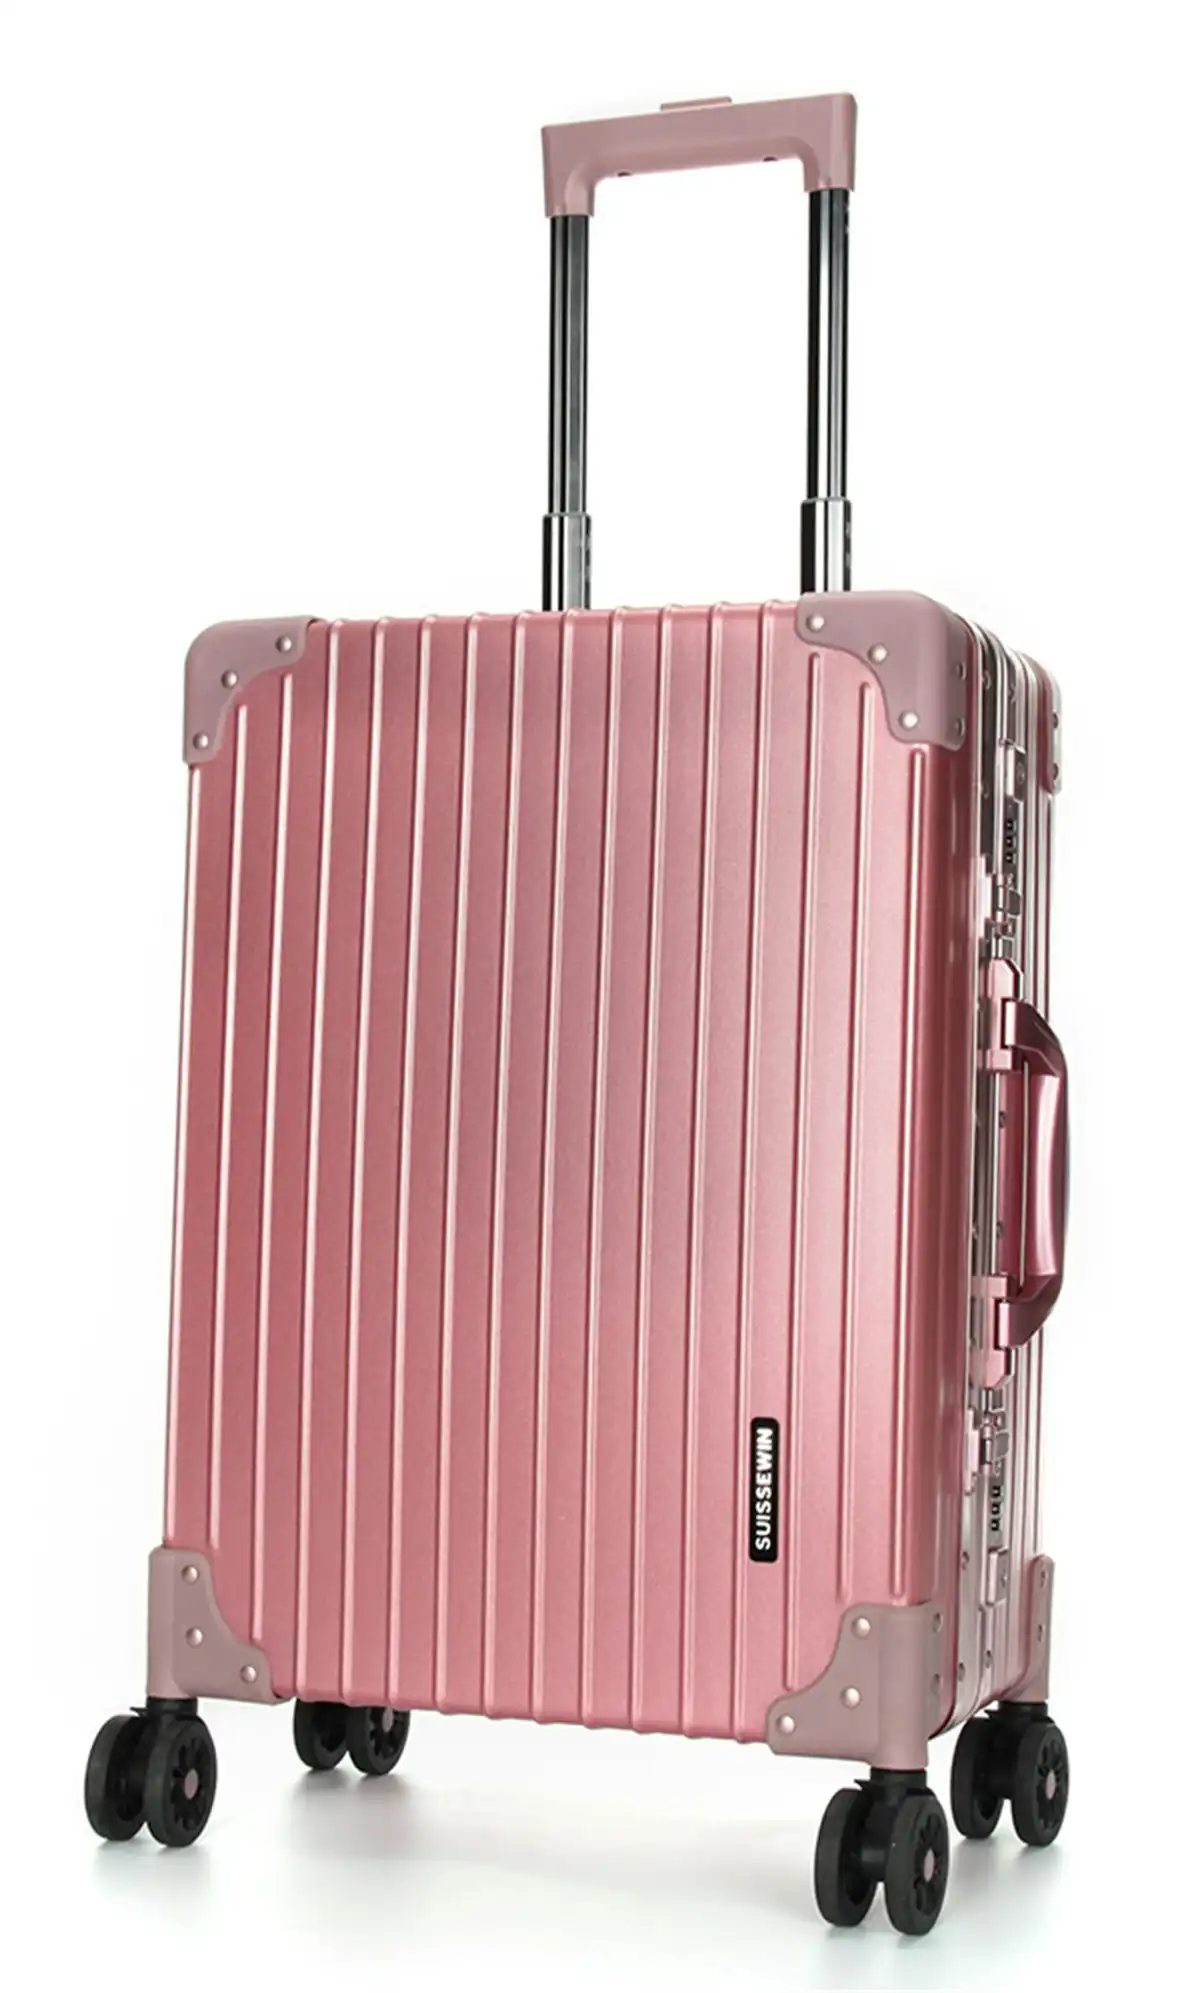 Suissewin Aluminium Luggage Suitcase Lightweight TSA Lock 8 Wheels 360 Degree Rolling Carry On Hardcase SN7711A Rosegold